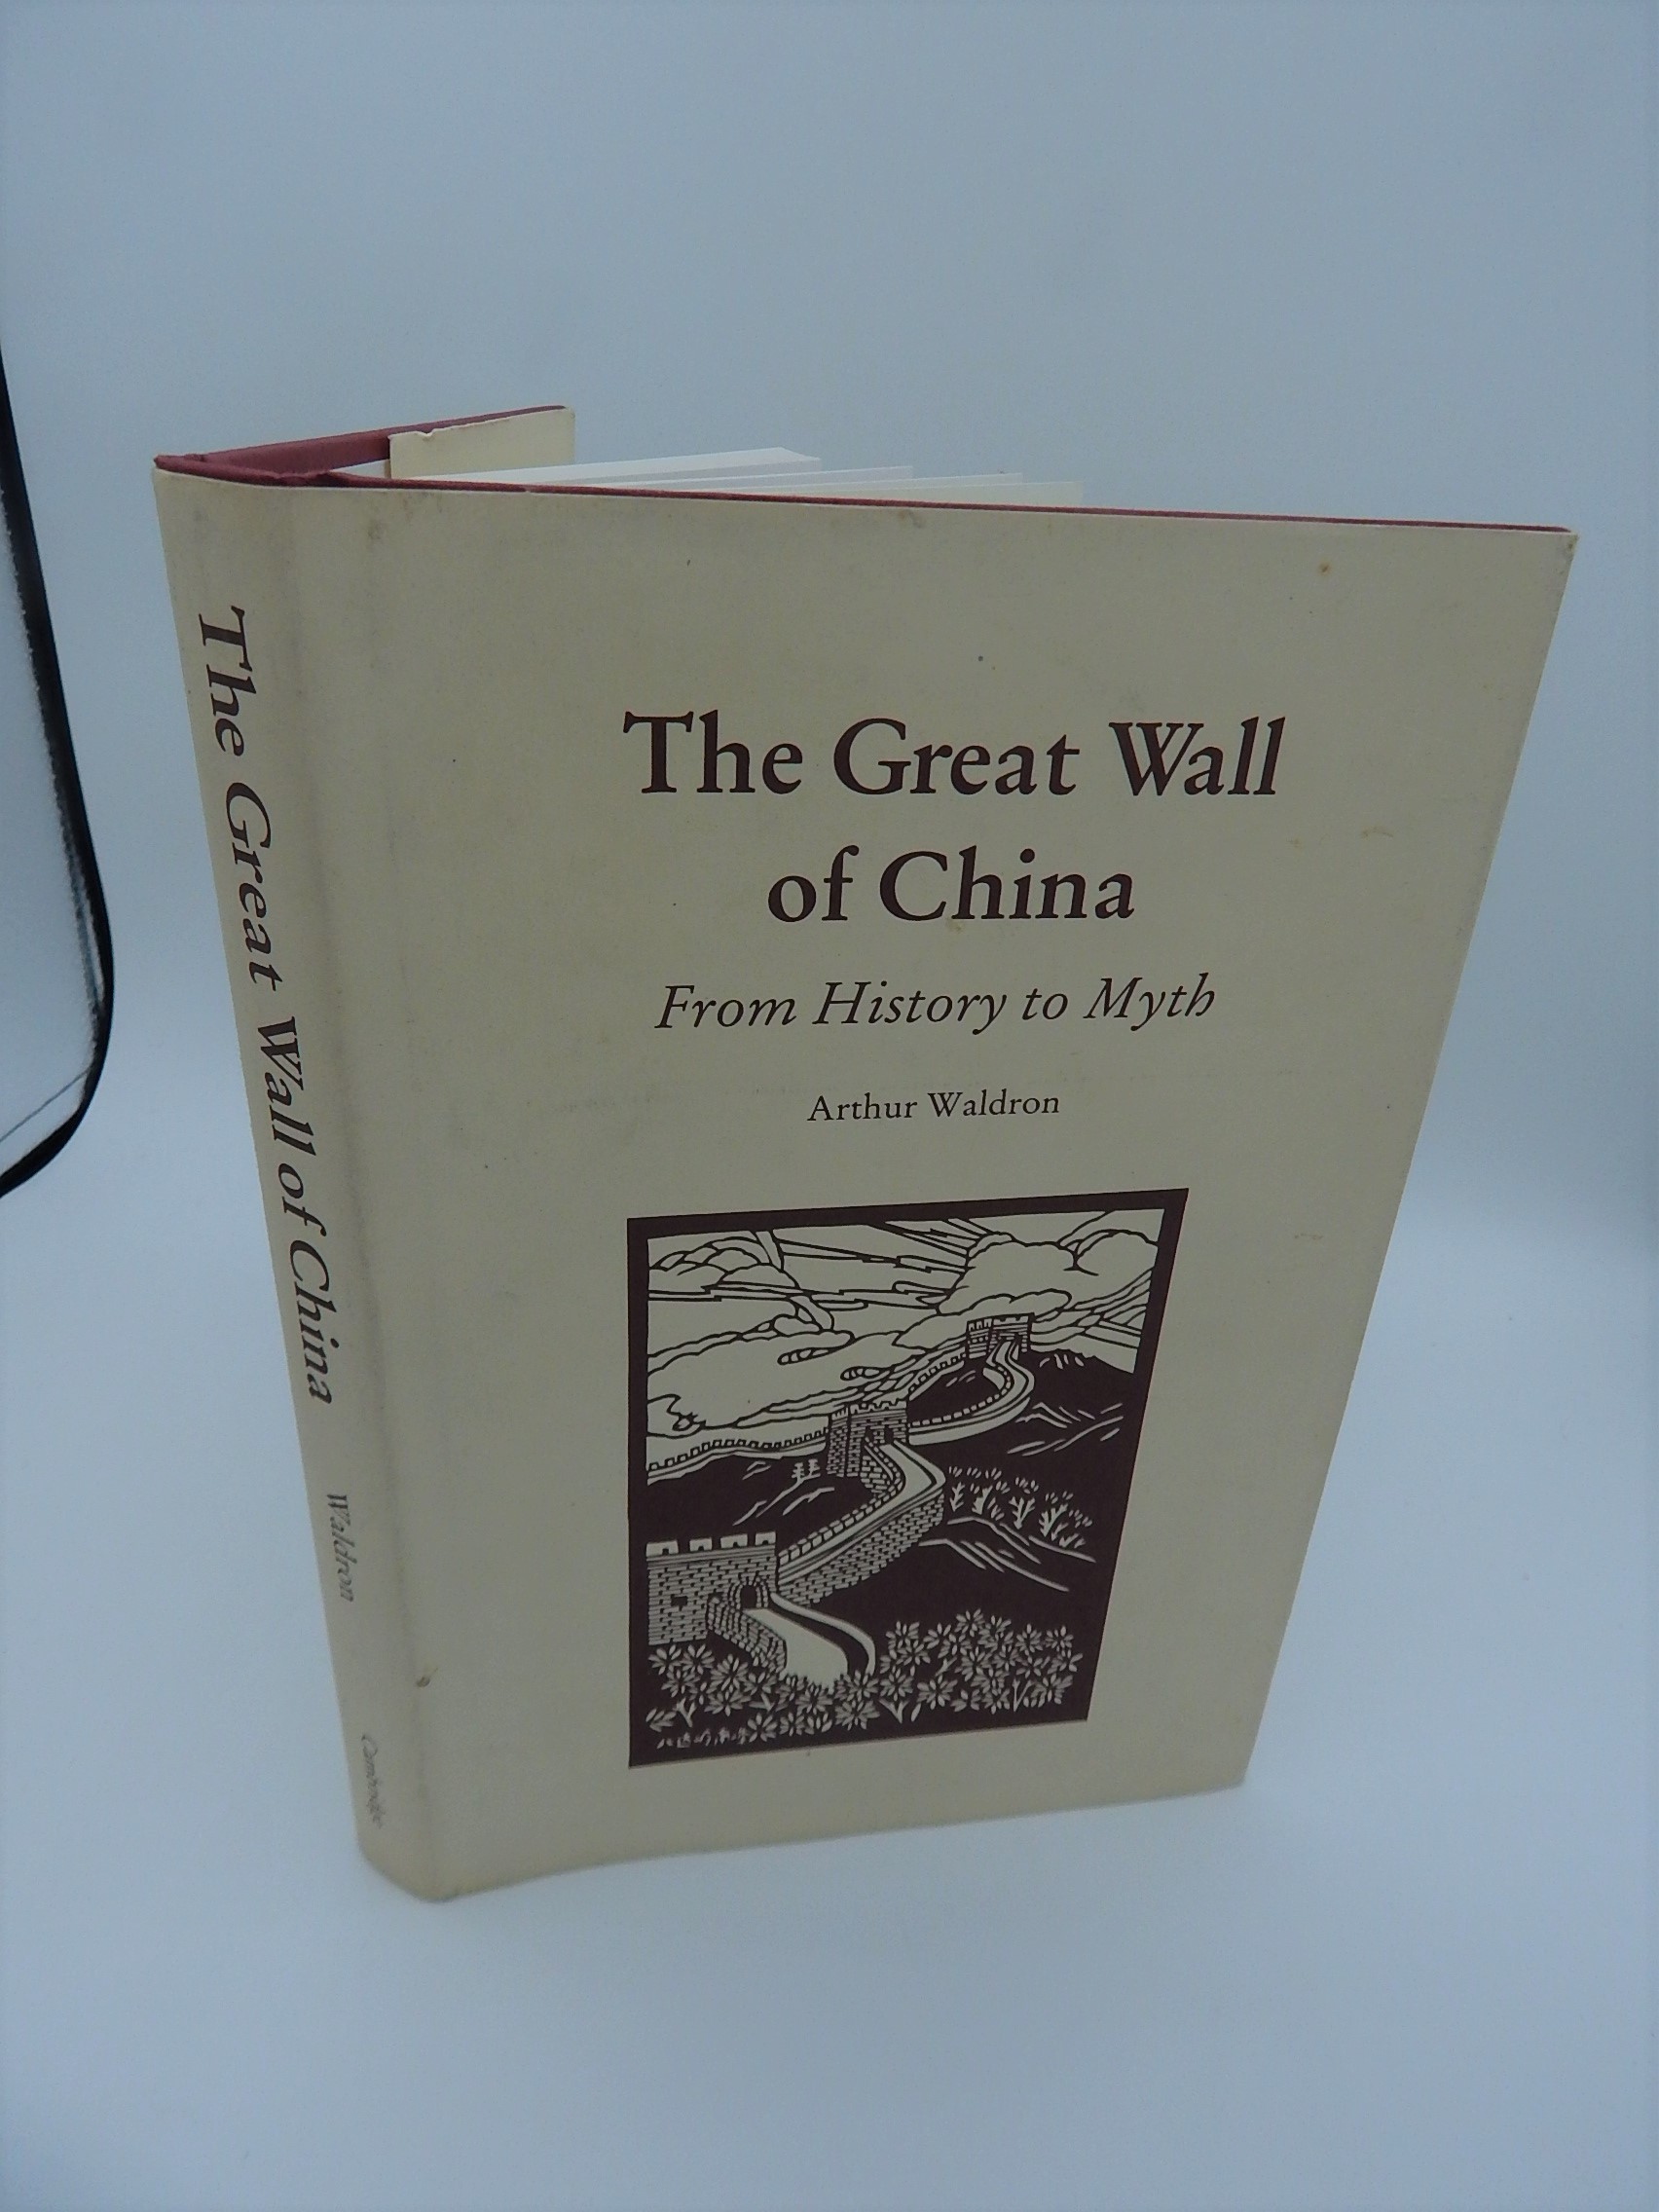 The Great Wall of China: From History to Myth (Cambridge Studies in Chinese History, Literature and Institutions) - Waldron, Arthur